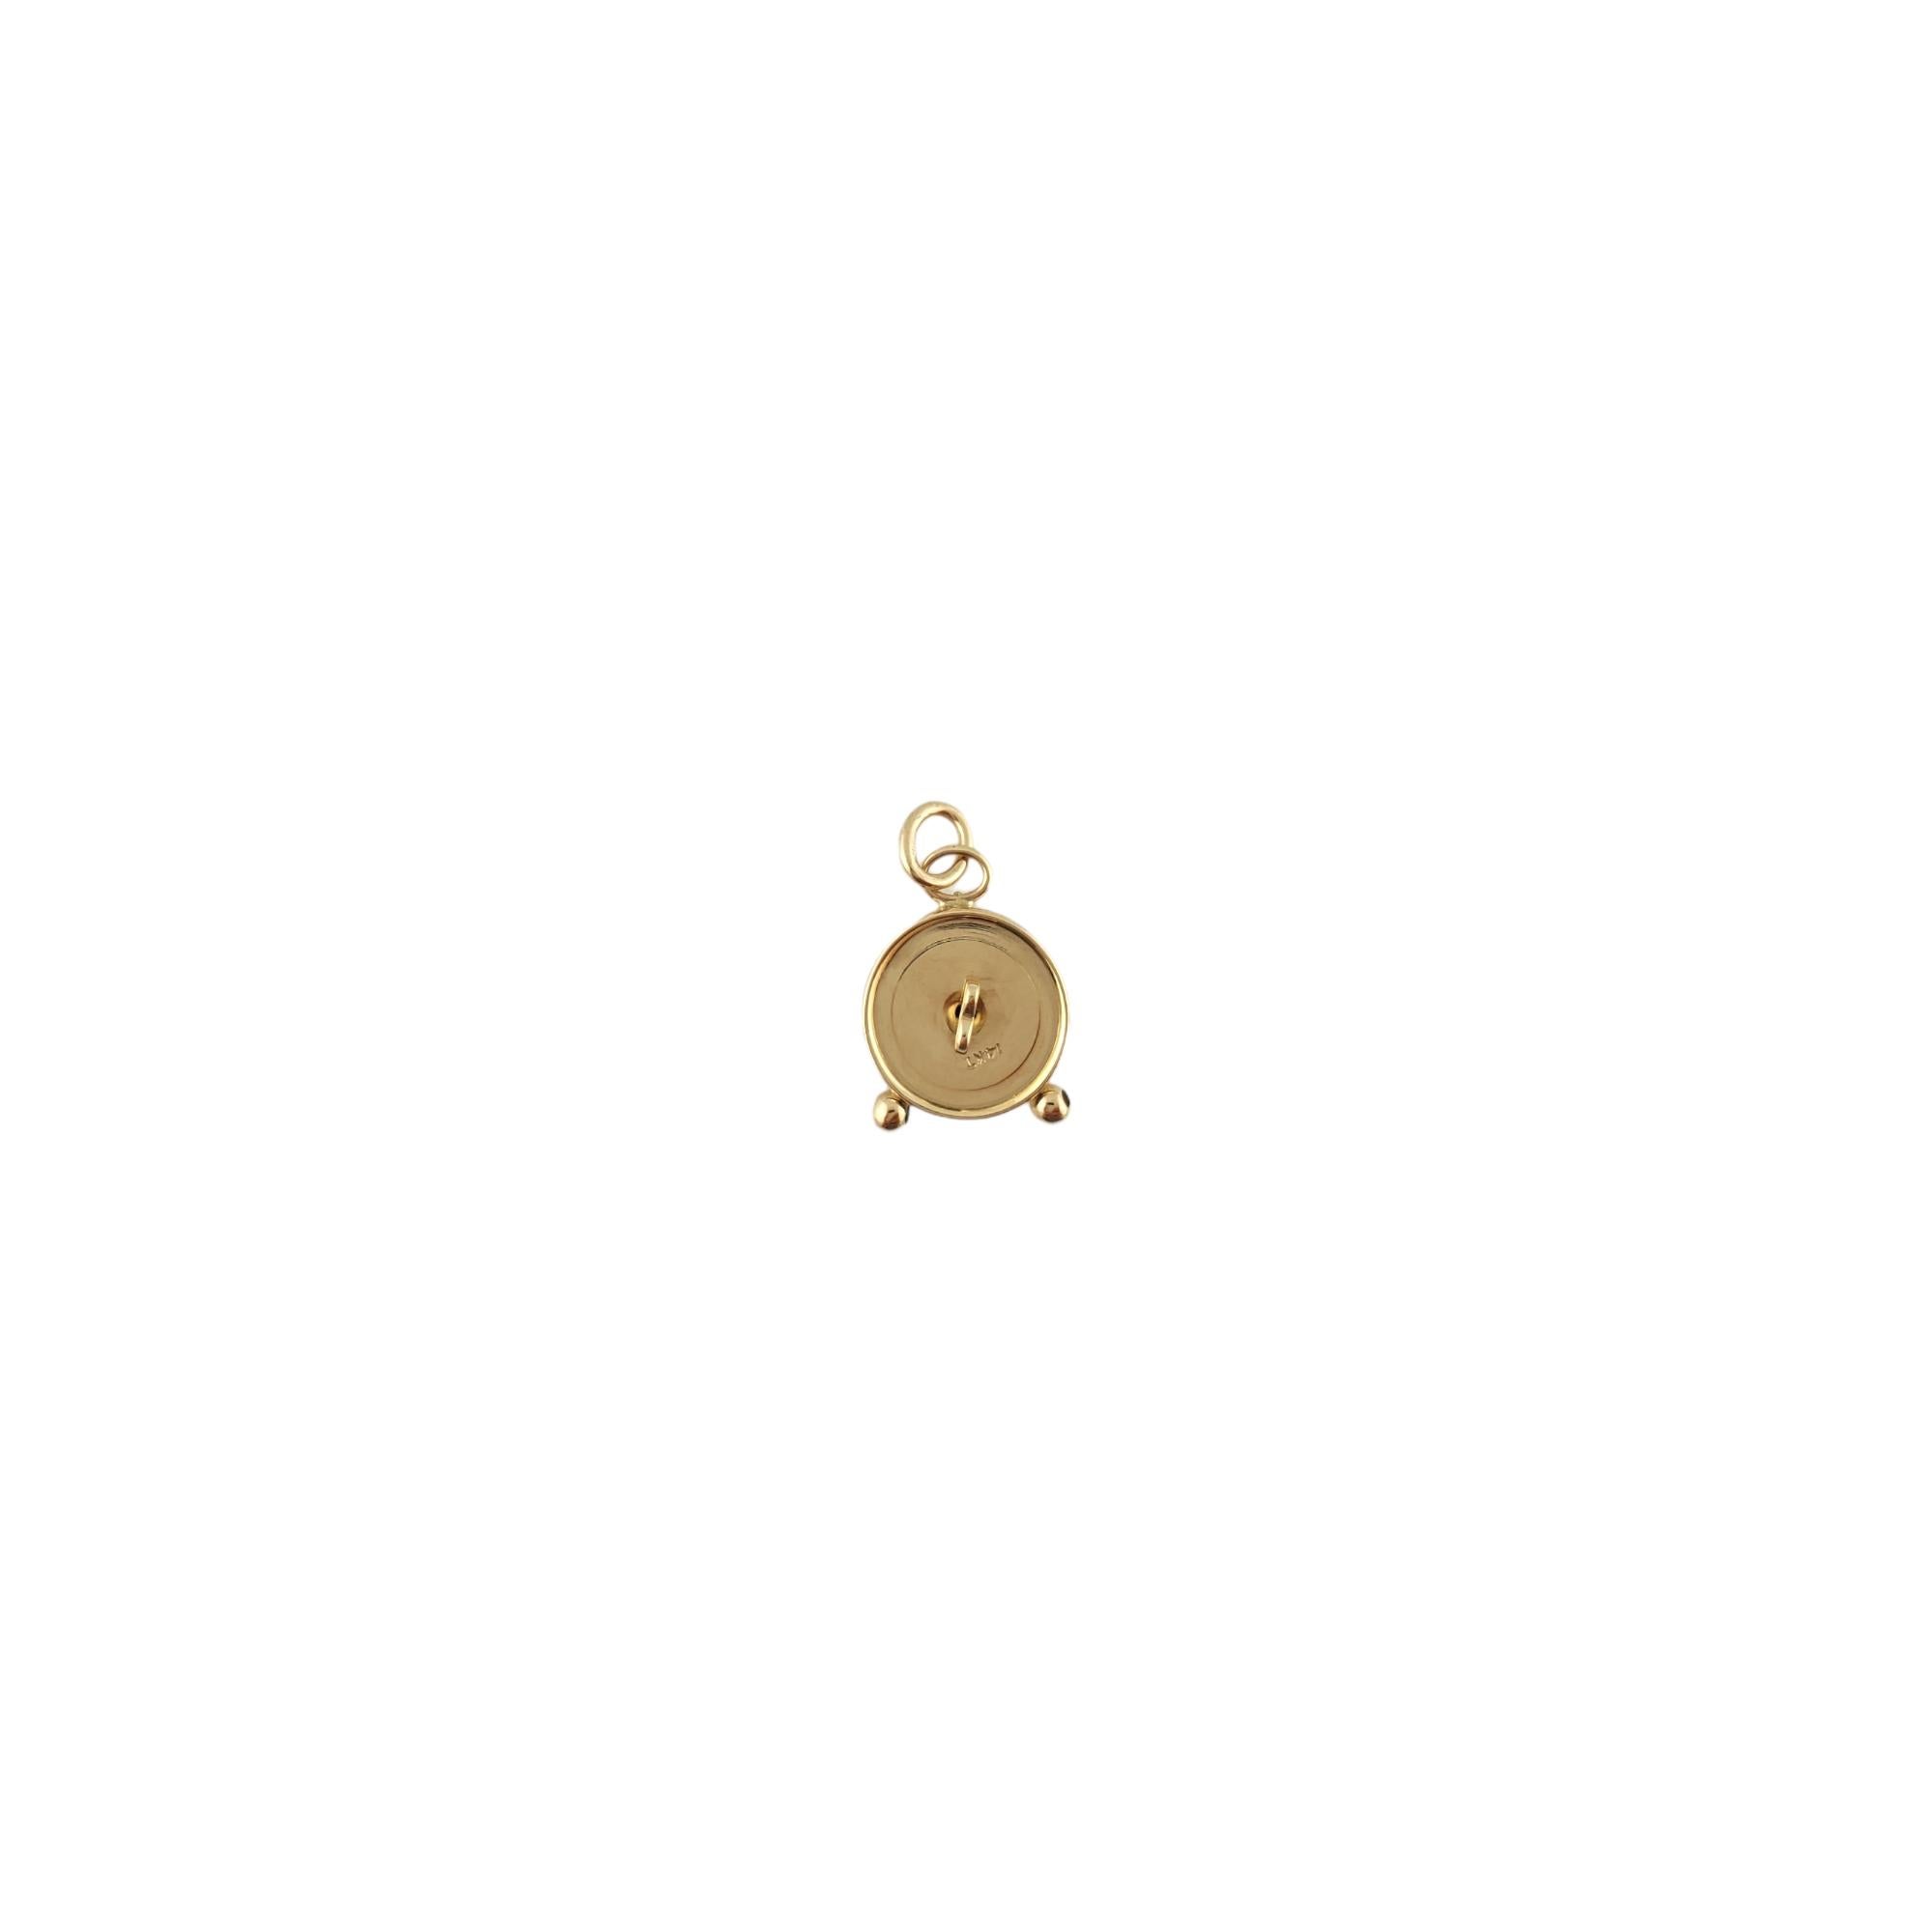 14K Yellow Gold Clock Charm With Mechanical Dial

This meticulously detailed piece features a 14K yellow gold clock charm with a mechanical dial.

Size: 15.1 mm X 11.08 mm

Weight: 1.4 g/ 0.9 dwt

Hallmark: 14Kt

Very good condition, professionally